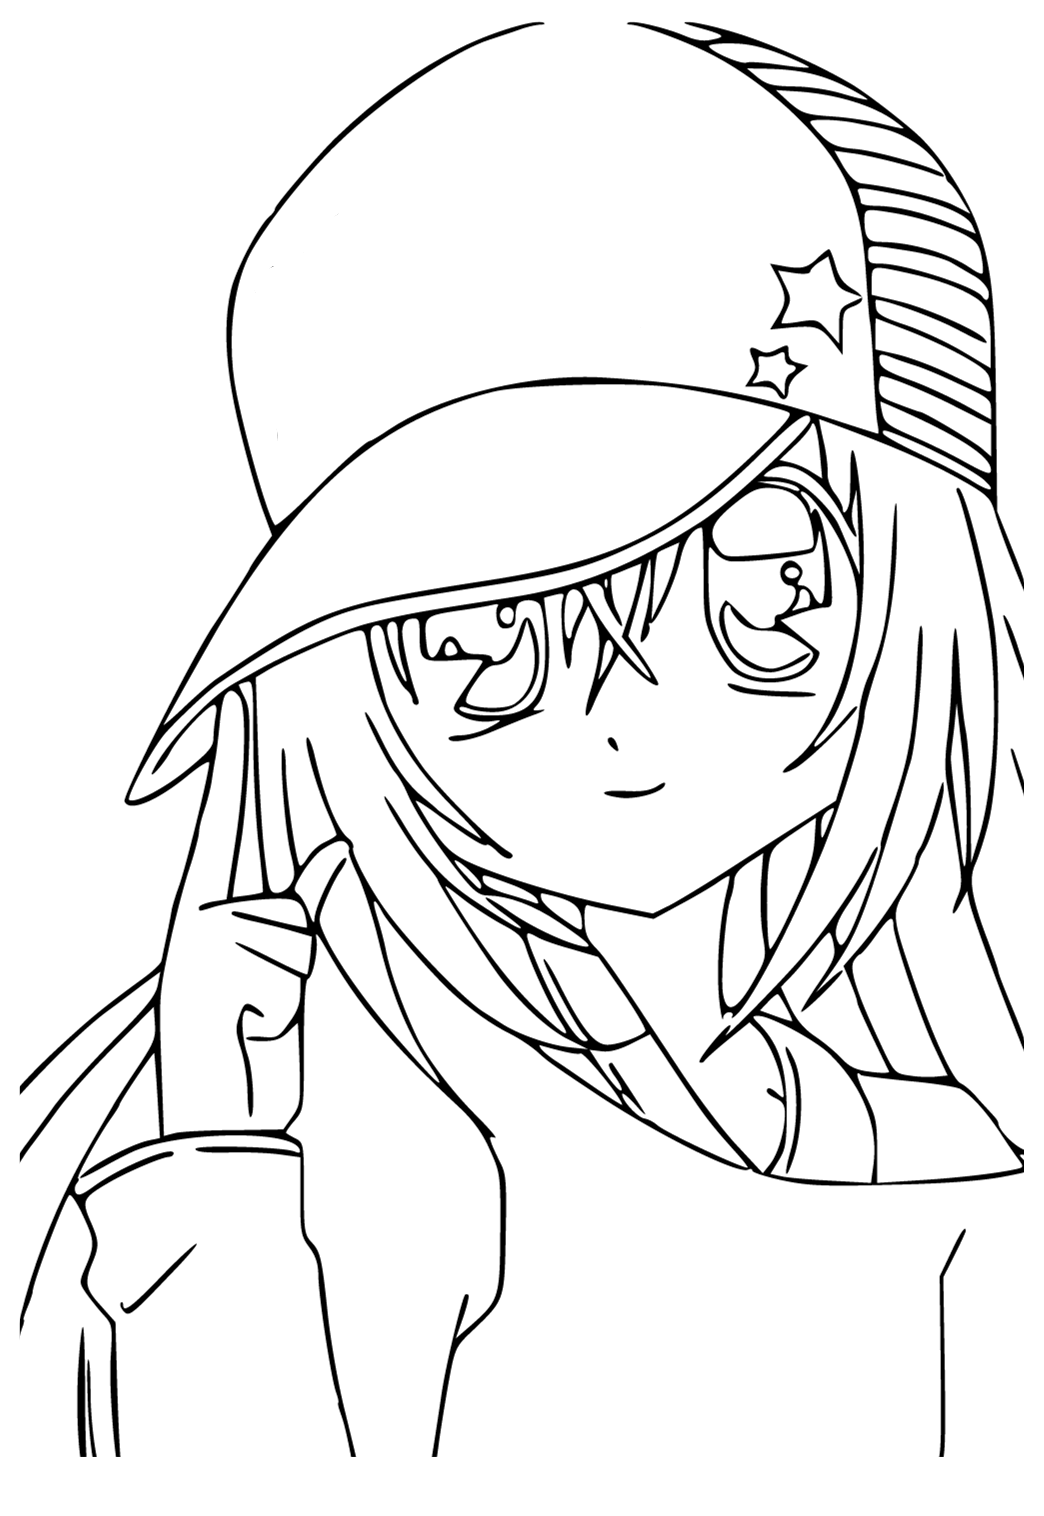 Free Printable Anime Cap Coloring Page for Adults and Kids - Lystok.com